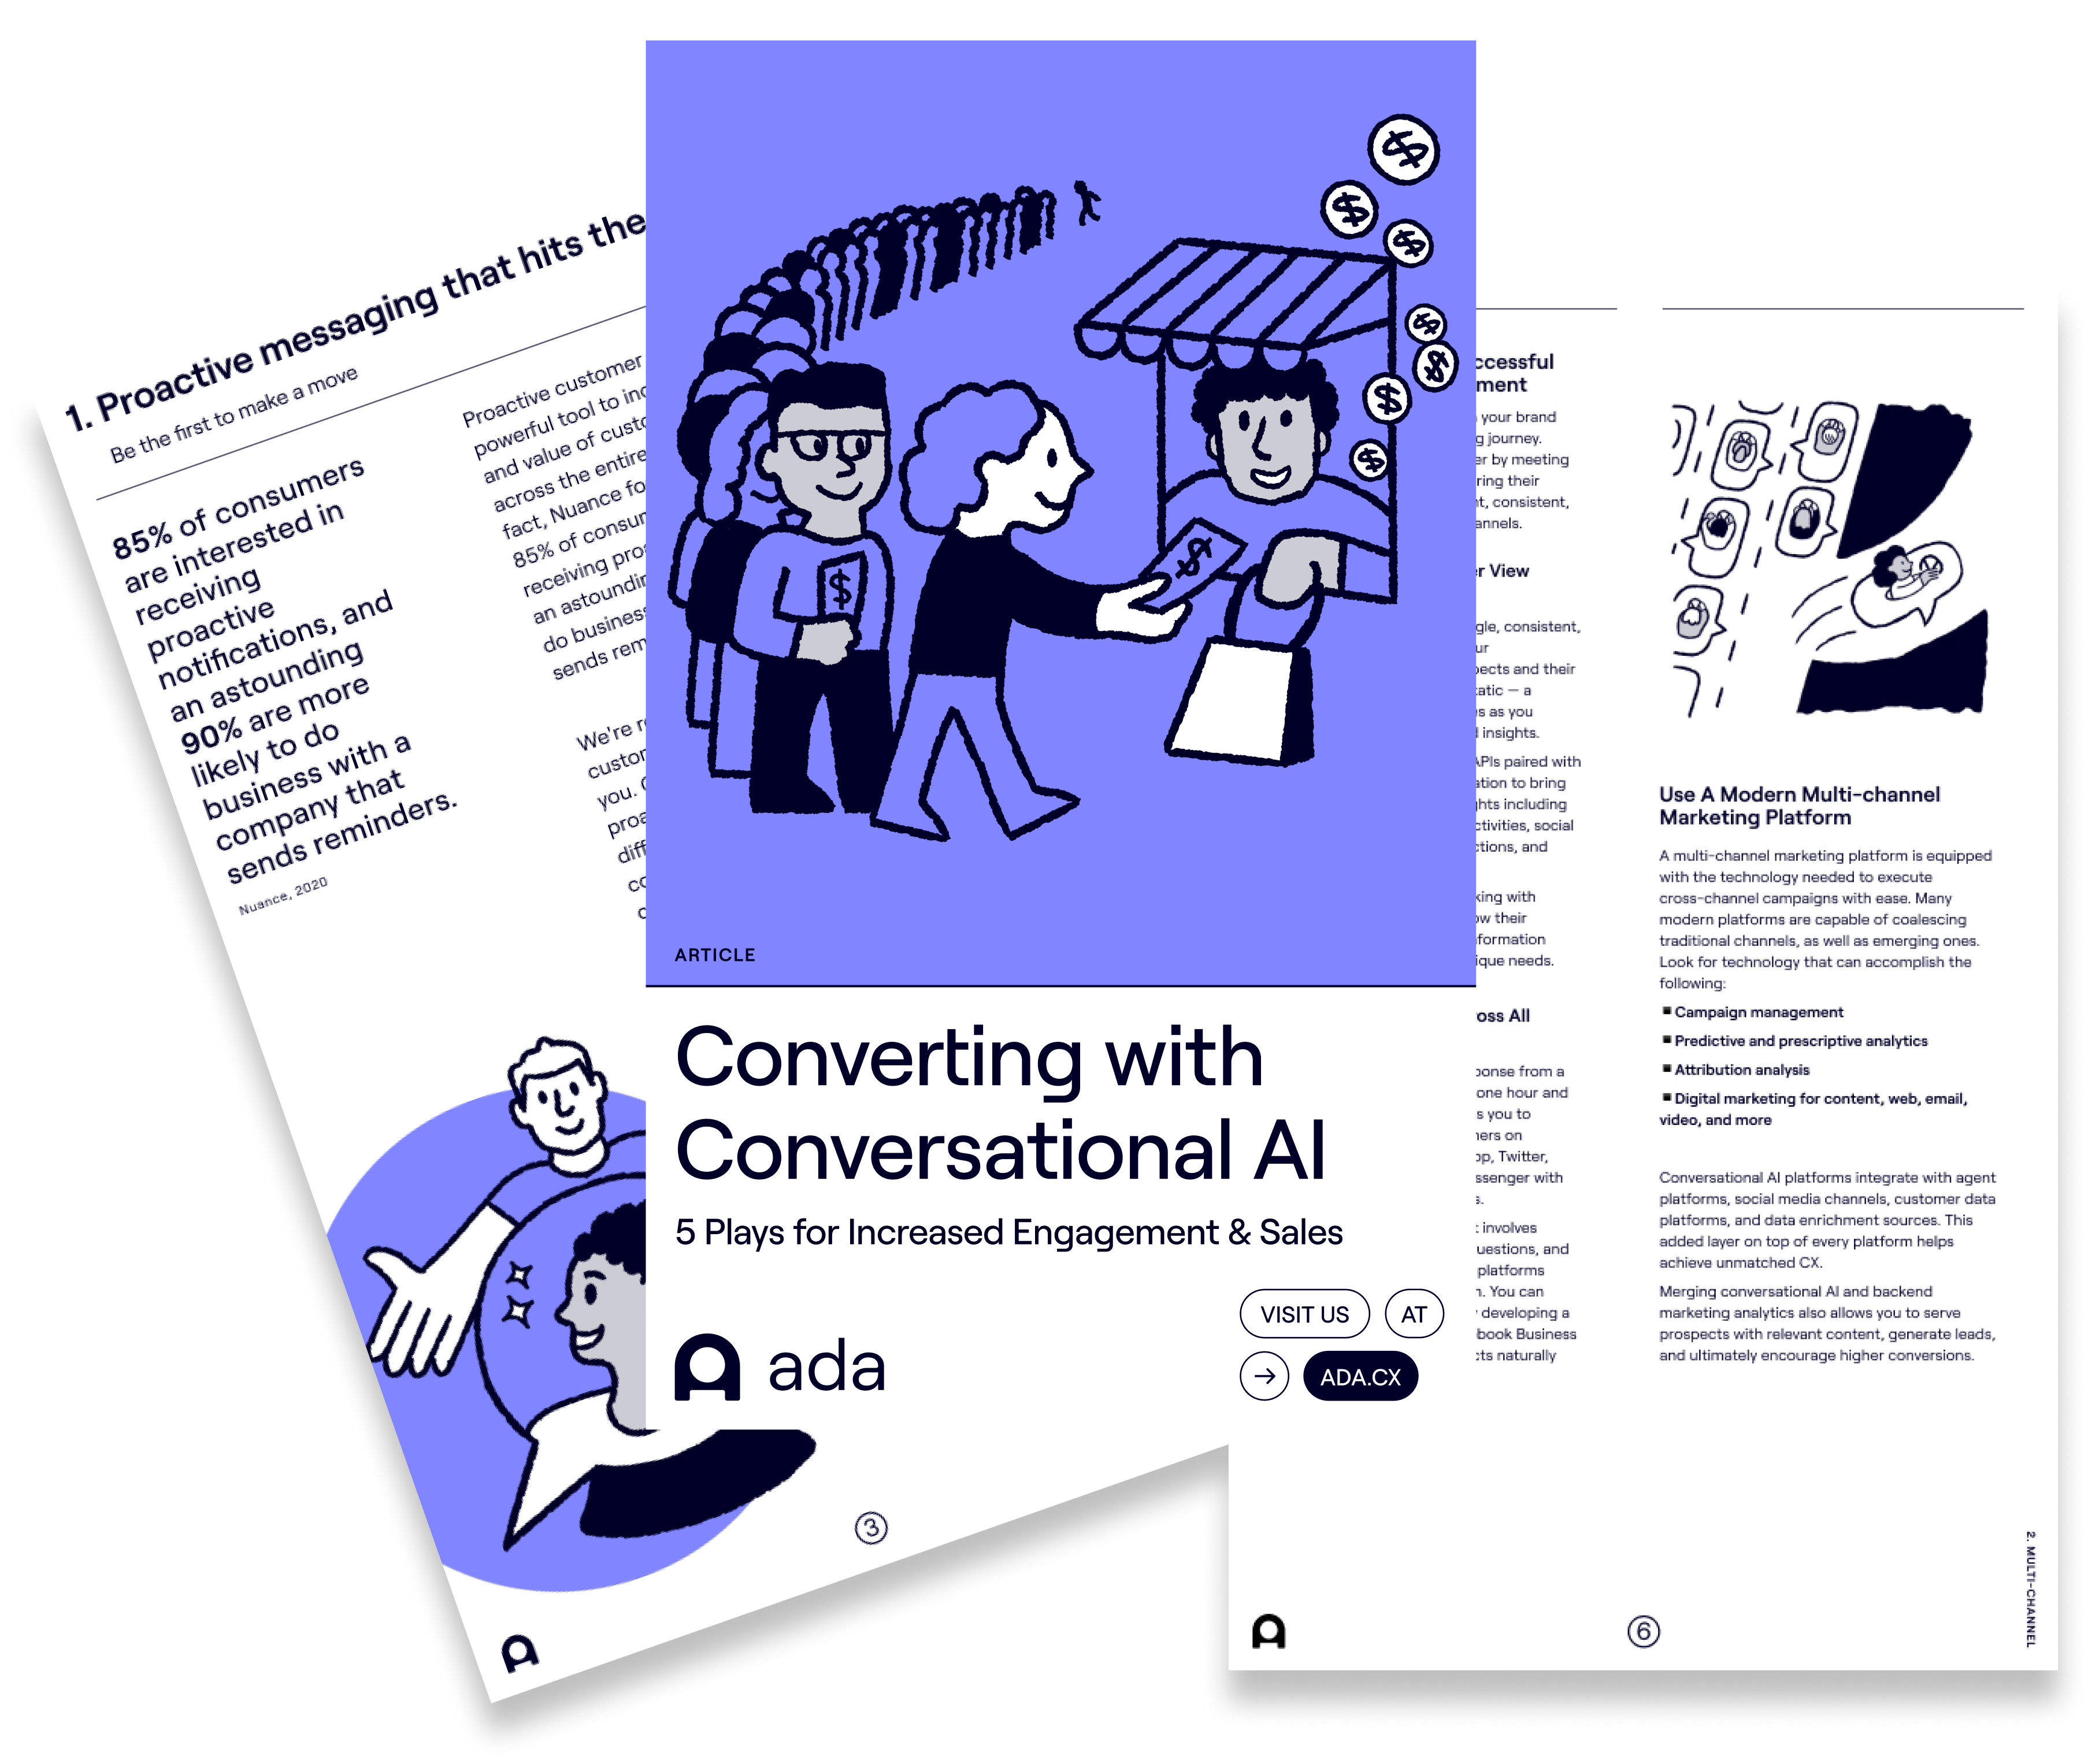 Converting with Conversational AI